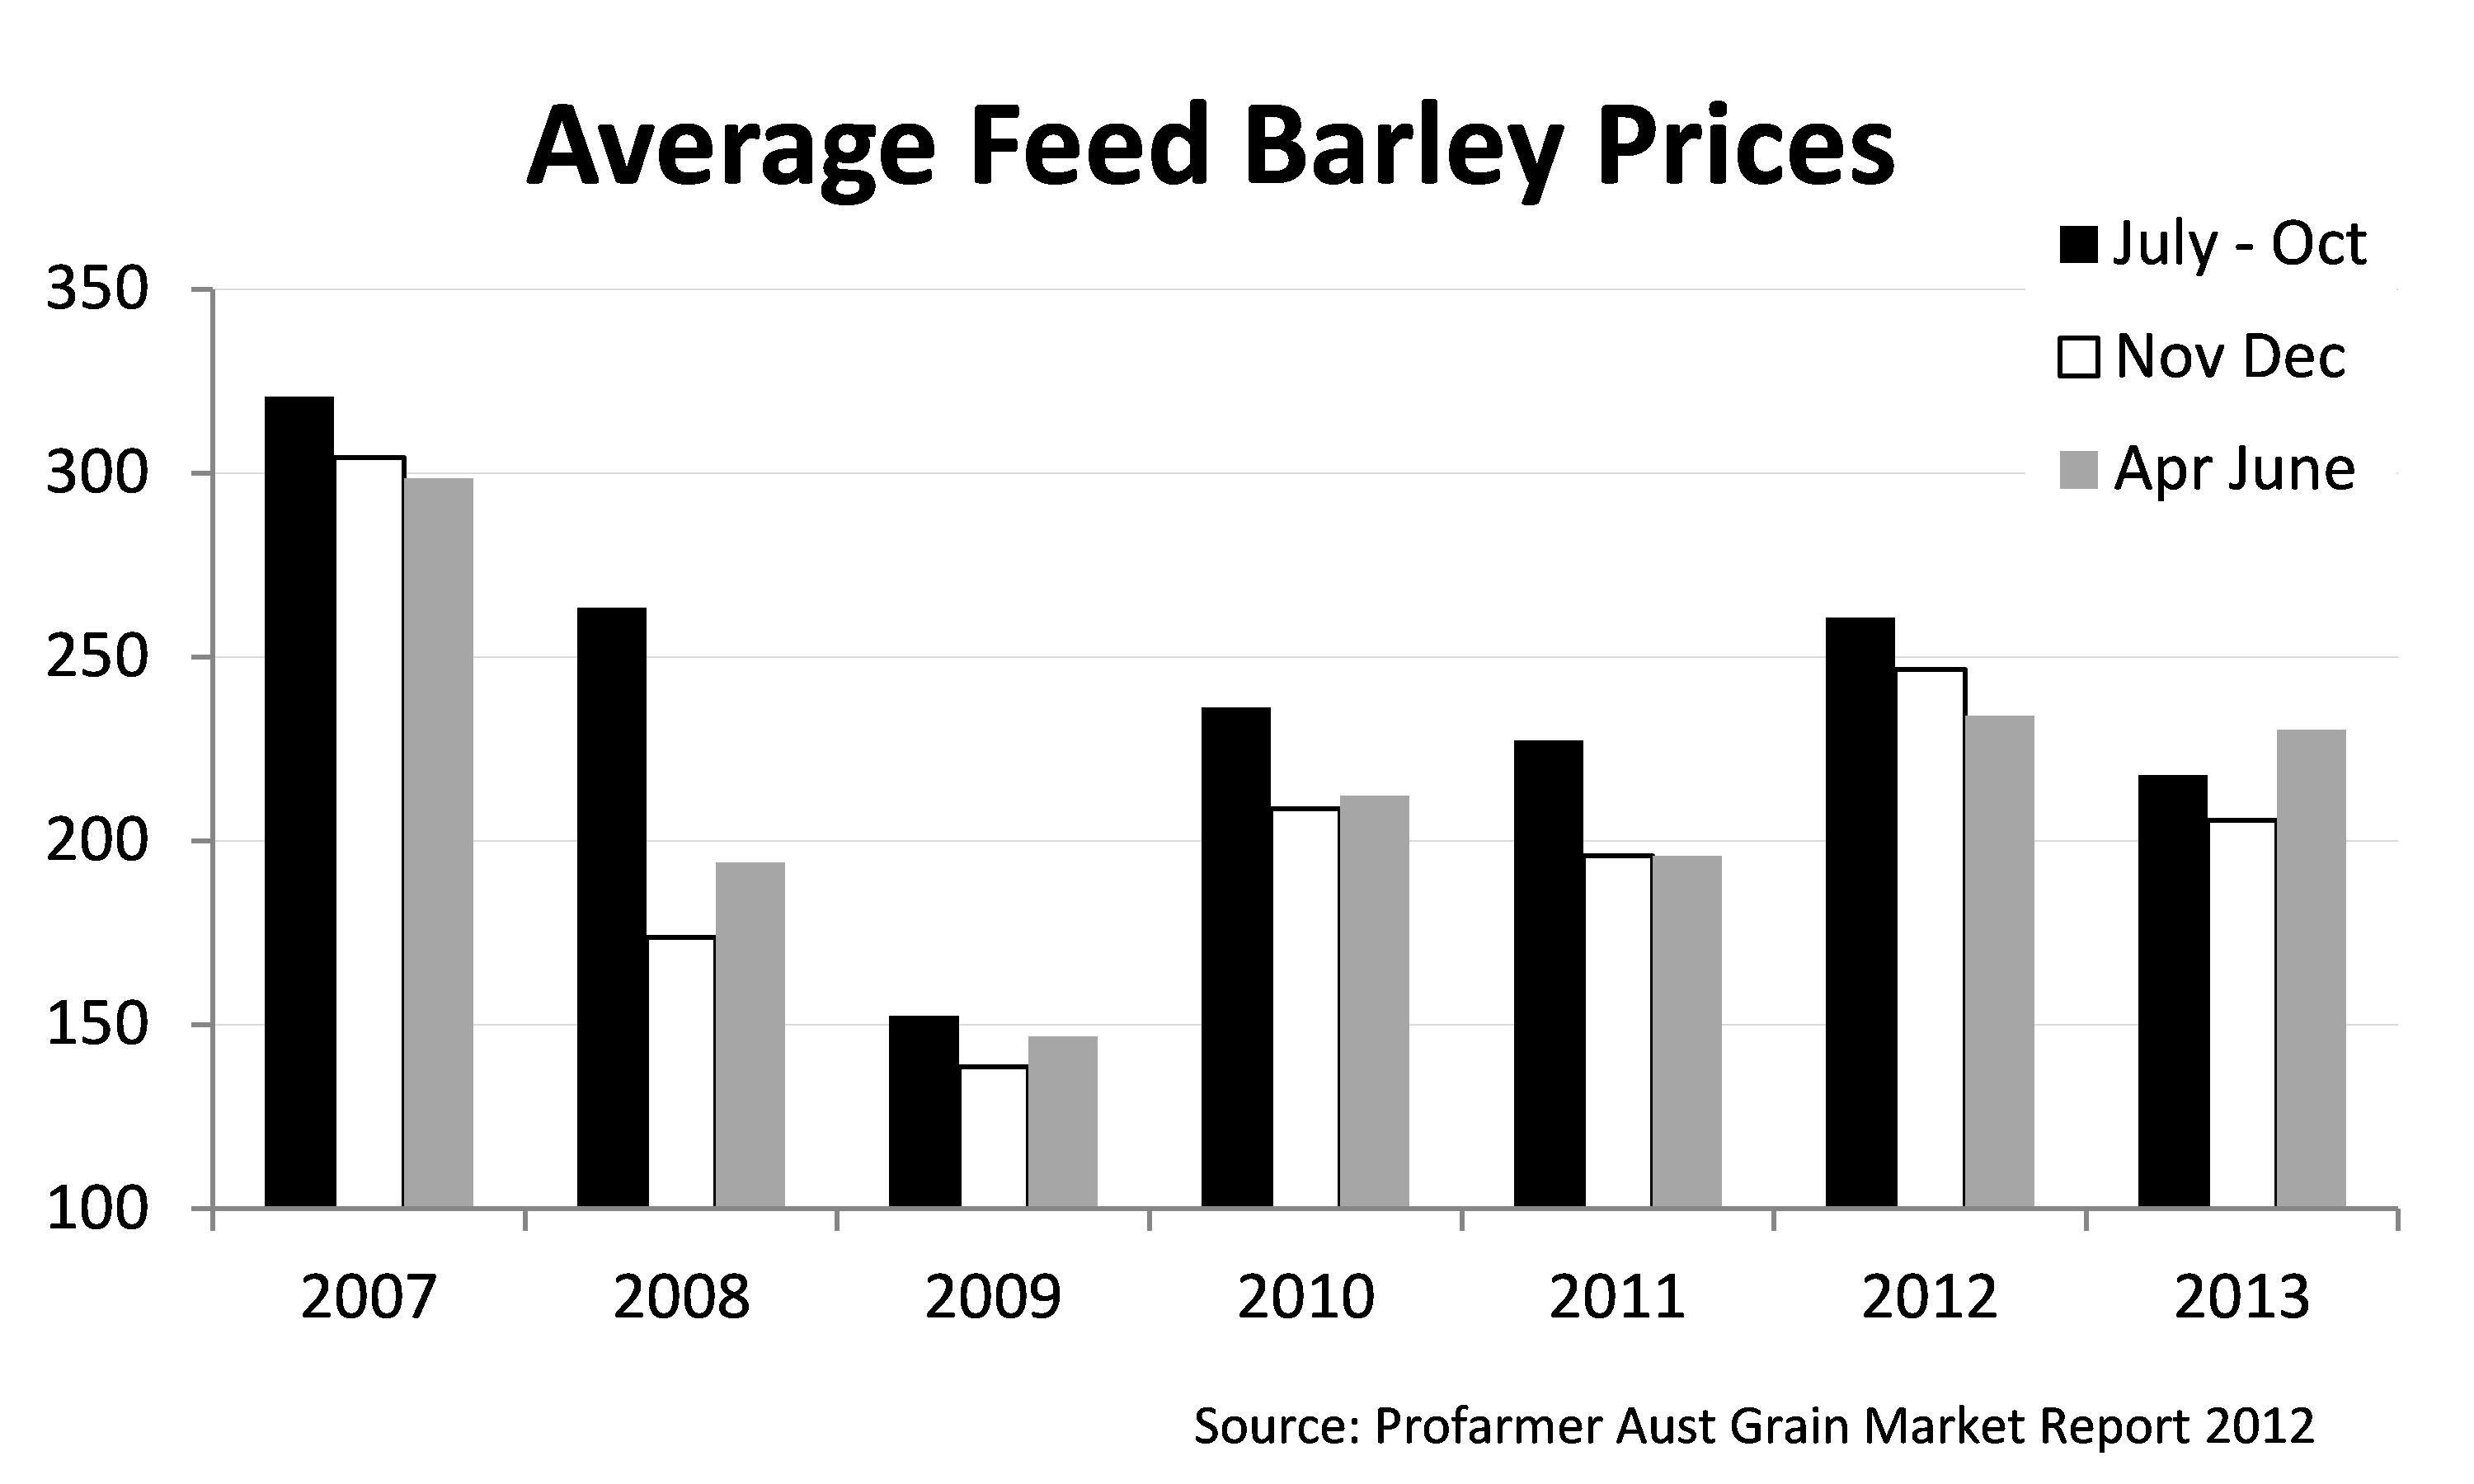 Figure 3. 2007 to 2013 average feed barley prices.